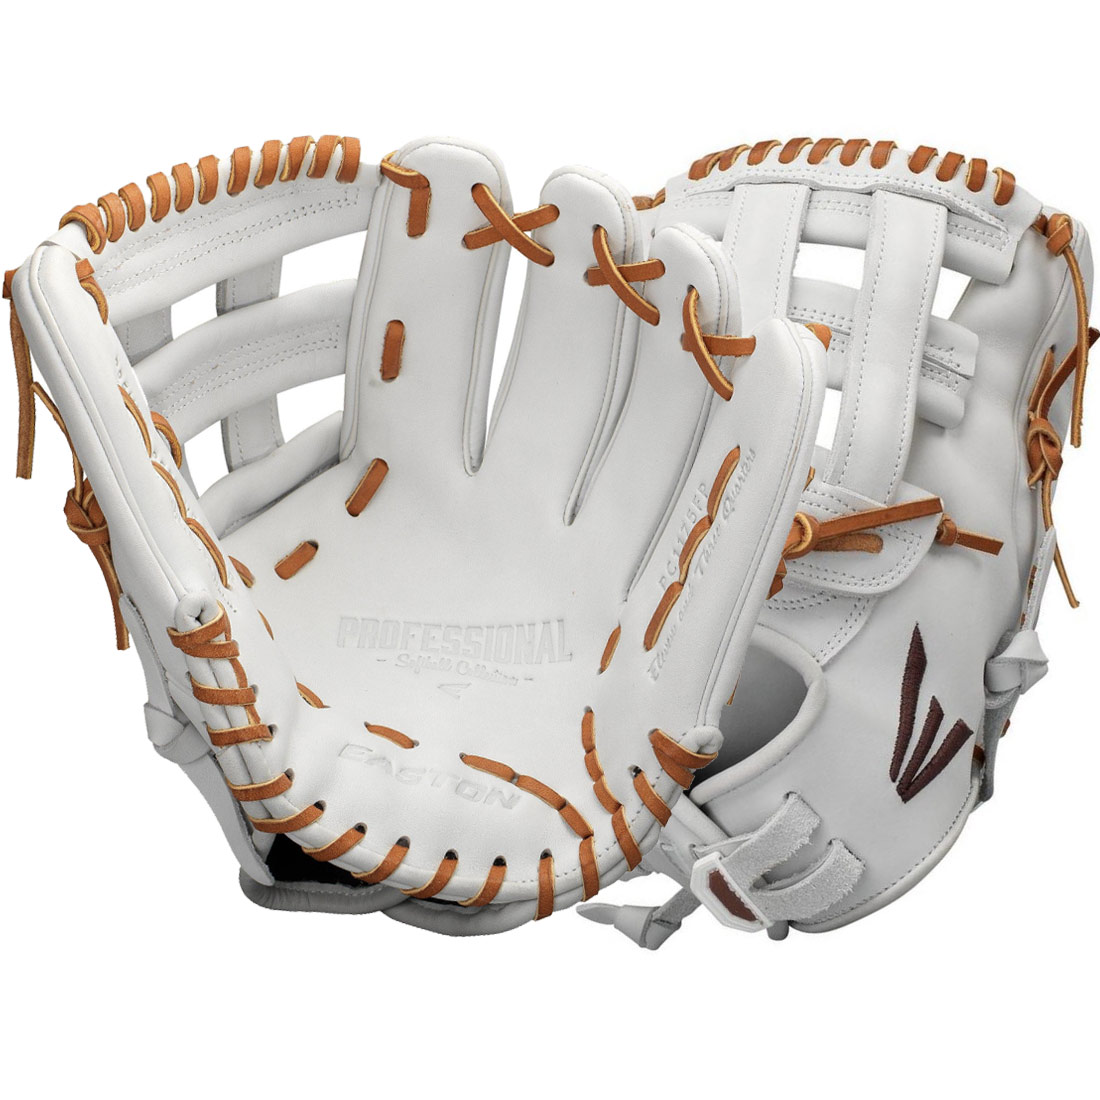 Easton Pro Collection Fastpitch Softball Glove 11.75\" PC1176FP